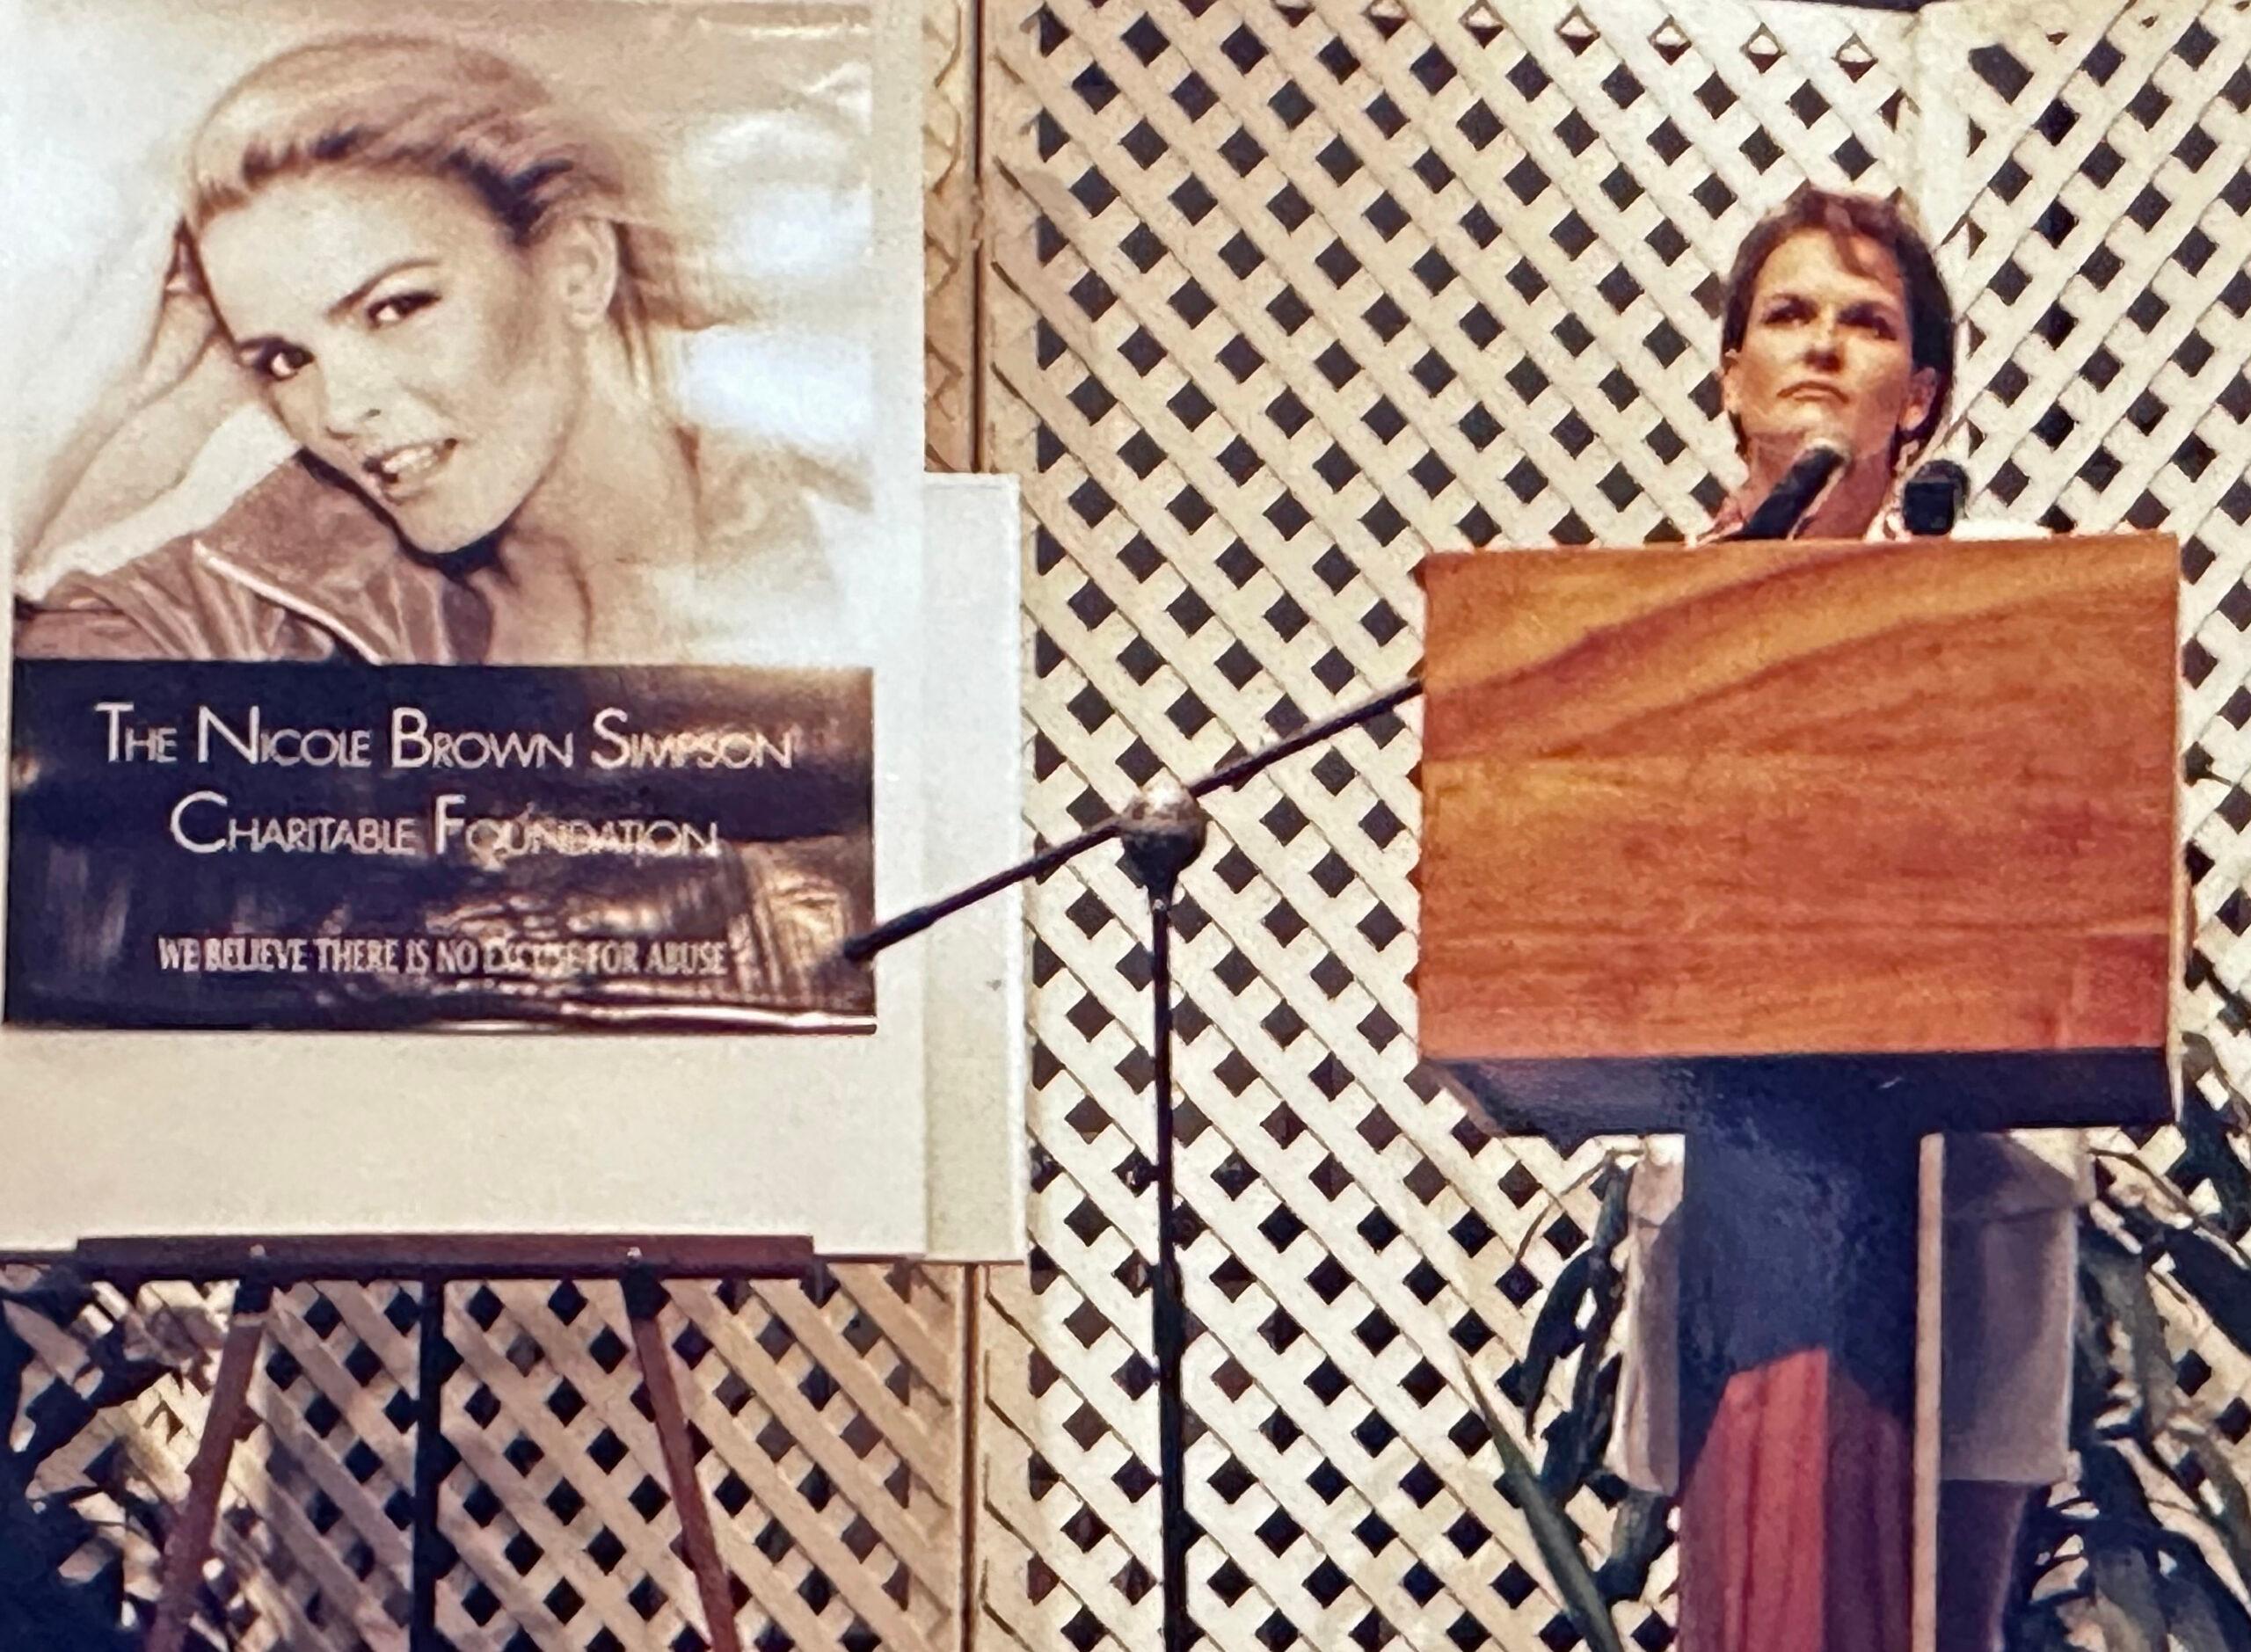 Sister of Nicole Brown Simpson Campaign to Raise Awareness on Domestic Abuse